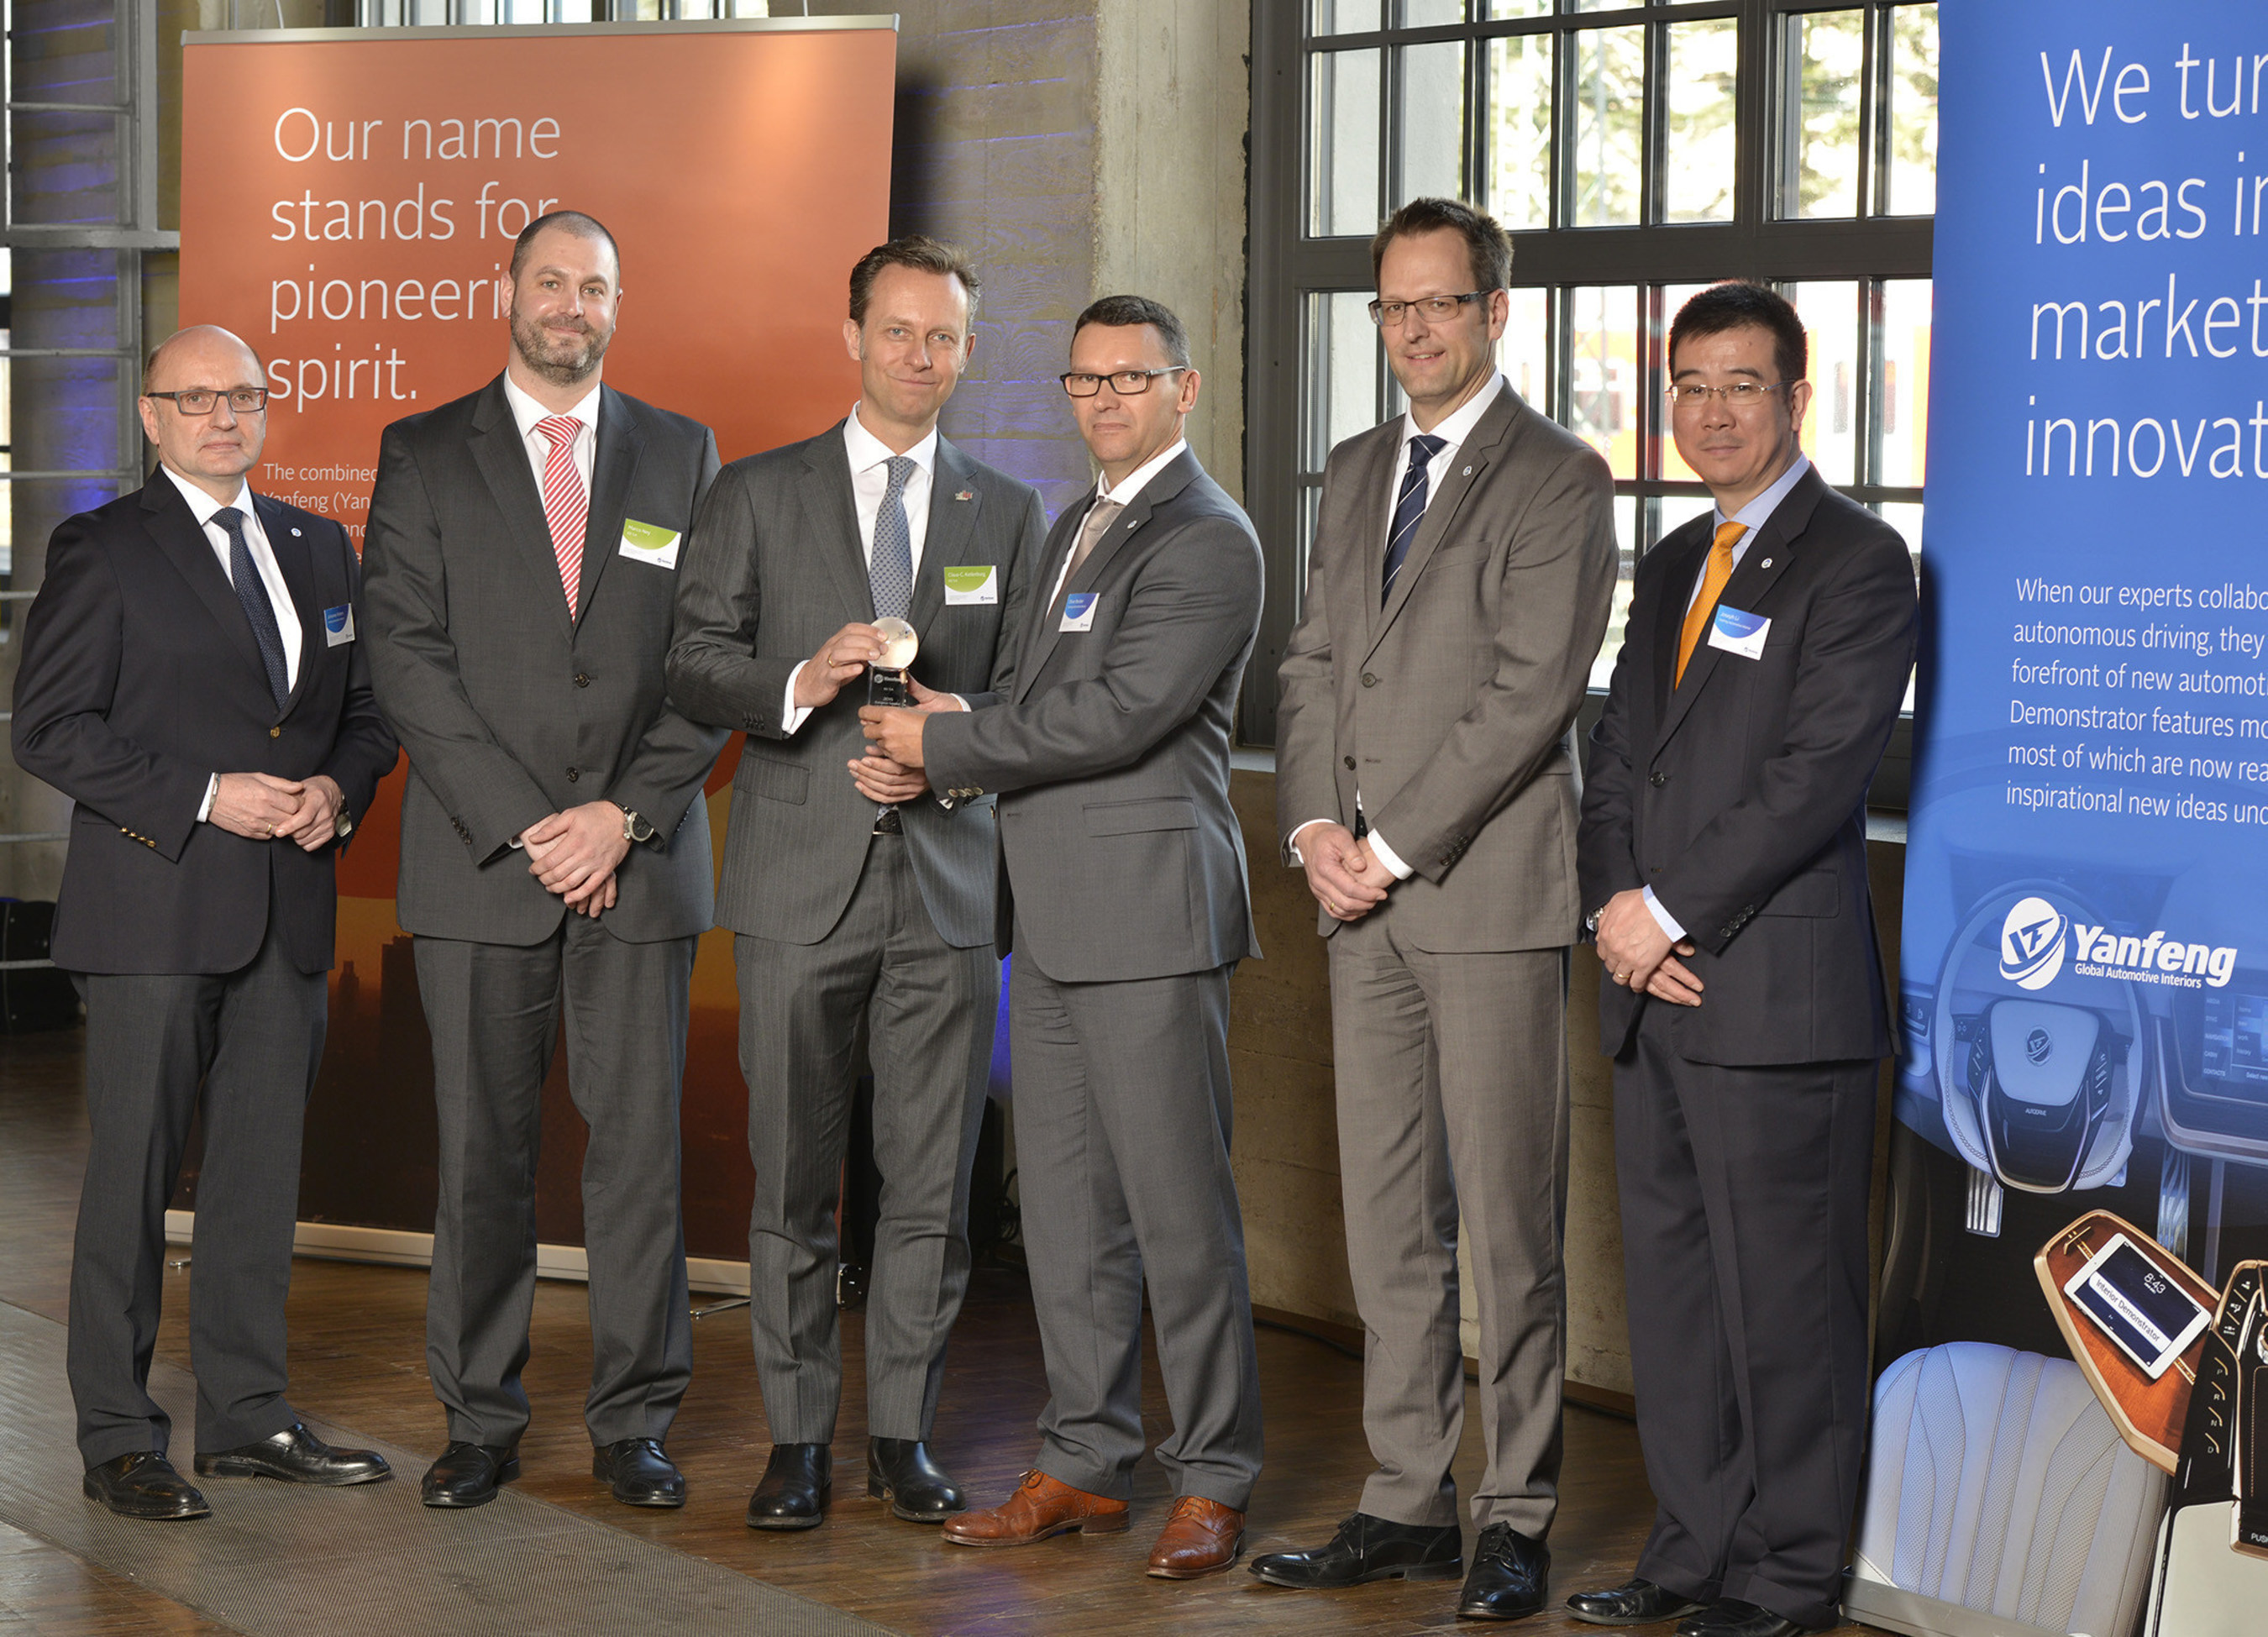 The supplier IEE S.A. from Luxembourg, an innovative developer of specialized sensor systems, was honored from Yanfeng Automotive Interiors with the Leadership Award in the Innovation category. from left to right: Johannes Roters, CEO at YFAI, Marco Ney, Business Development Manager at IEE S.A., Dr. Claus-C. Kedenburg, Executive Vice President Commercial Sales, Marketing and Business Development at IEE S.A., Dr.-Ing. Oliver Becker, Executive Director Process Innovation at YFAI, Gunnar Buechter, Director Procurement und Joseph Lee, Vice President and Deputy General Manager Europe & South Africa (both Yanfeng Automotive Interiors). (PRNewsFoto/Yanfeng Automotive Interiors) (PRNewsFoto/Yanfeng Automotive Interiors)